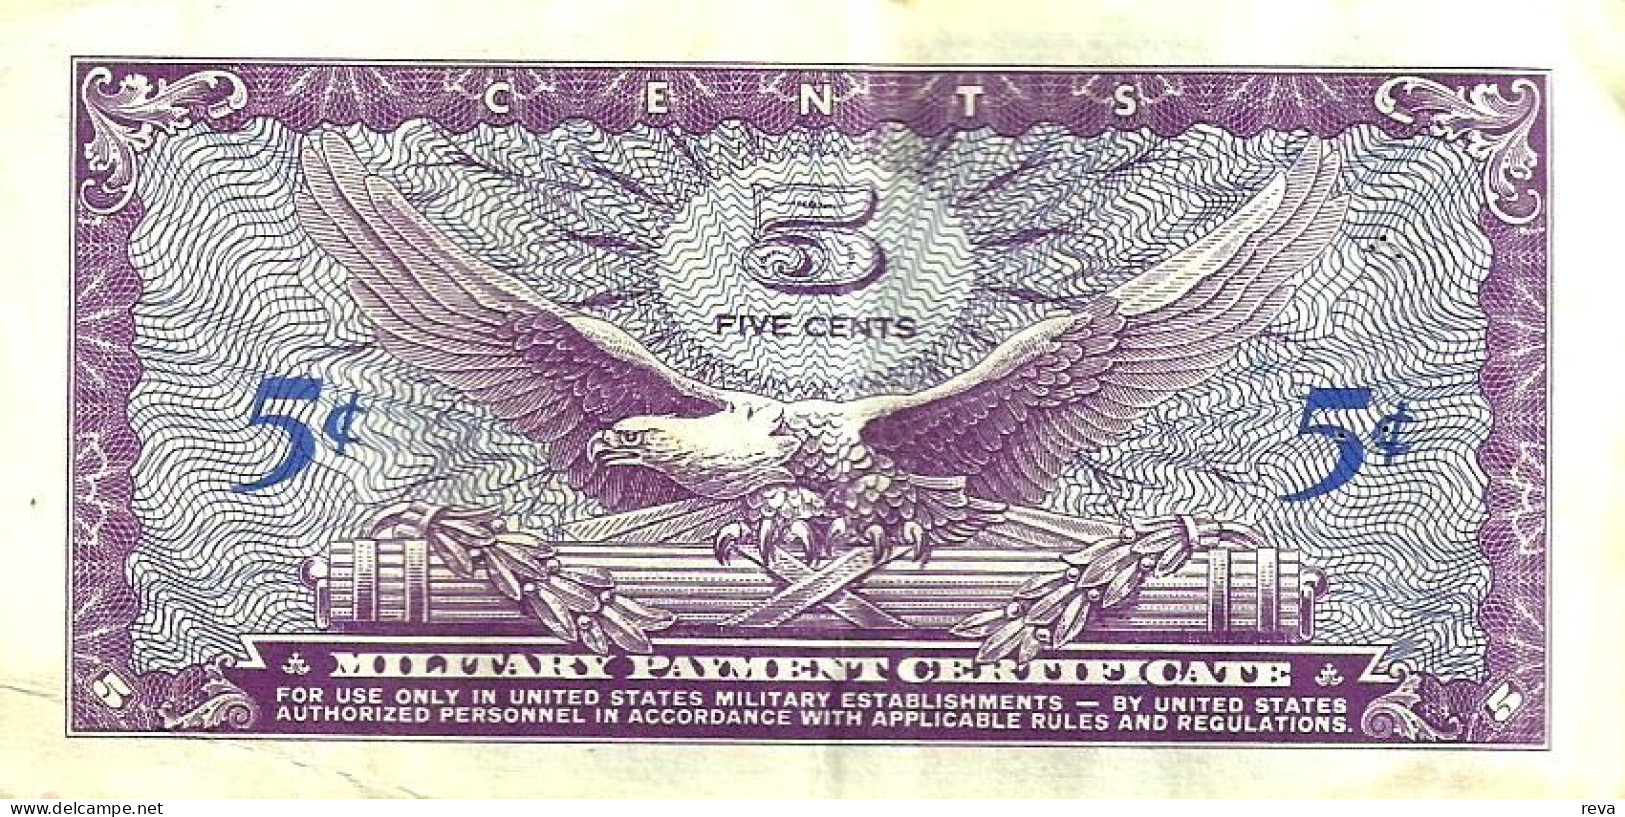 USA UNITED STATES 5 CENTS MILITARY CERTIFICATE PURPLE WOMAN SERIES 641 VF ND(1965-68) PM57a READ DESCRIPTION CAREFULLY!! - 1965-1968 - Serie 641